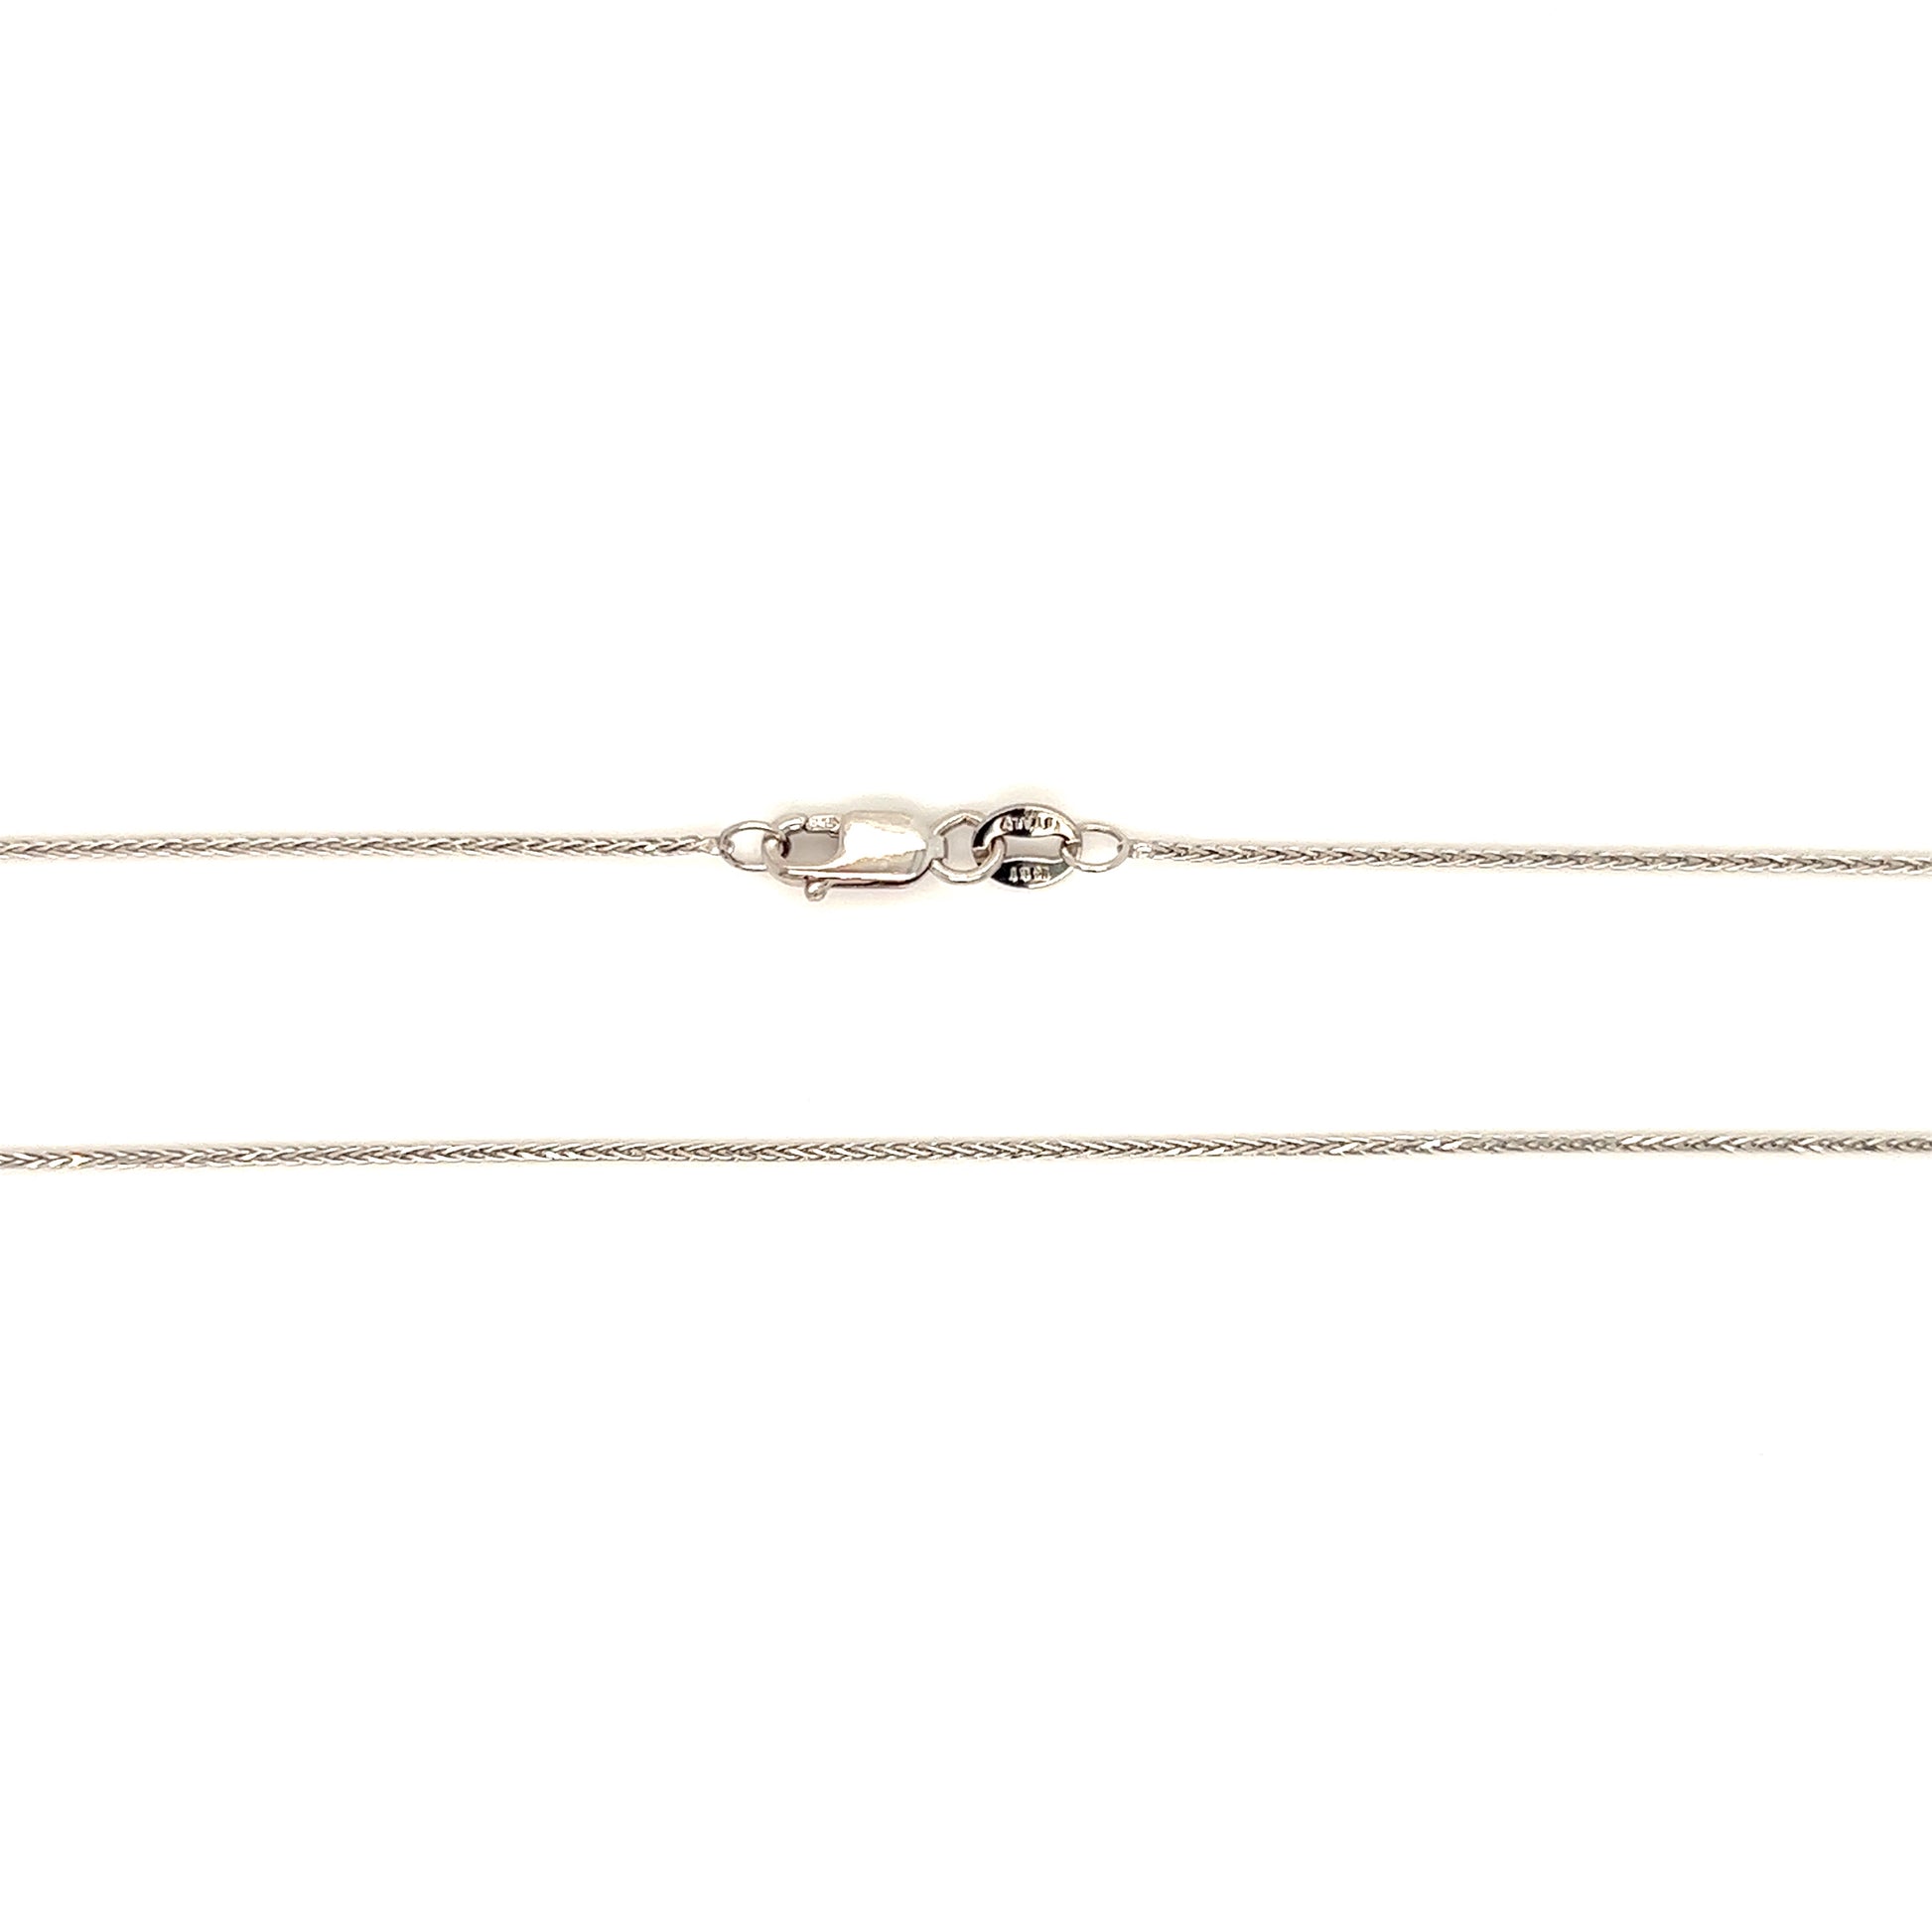 Wheat Chain 1.5mm with 18in Length in 14K White Gold Chain and Lobster Clasp View